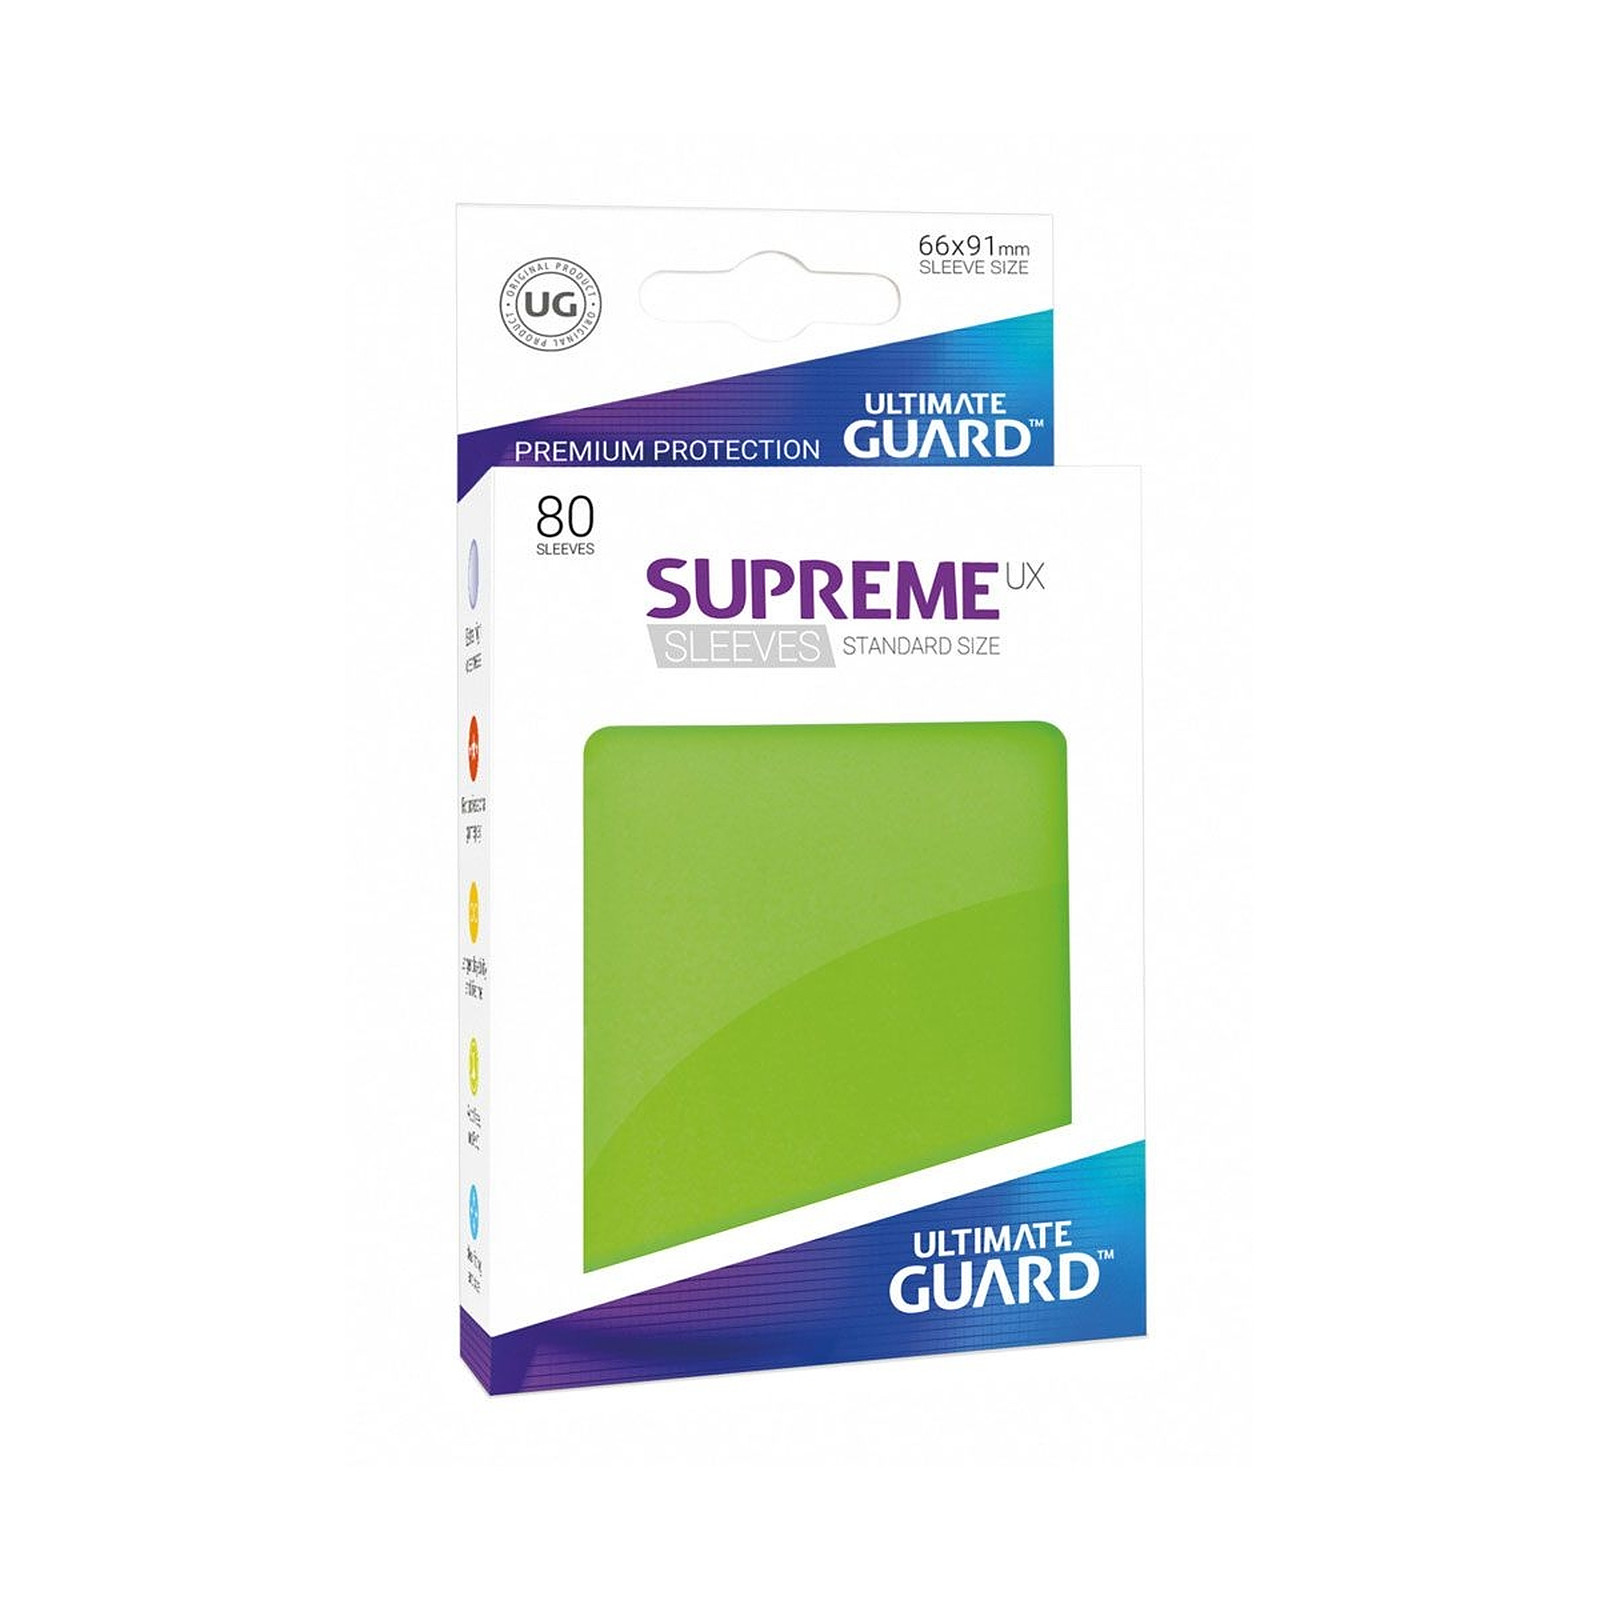 Ultimate Guard - 80 pochettes Supreme UX Sleeves taille standard Vert Clair - Accessoire jeux Ultimate Guard